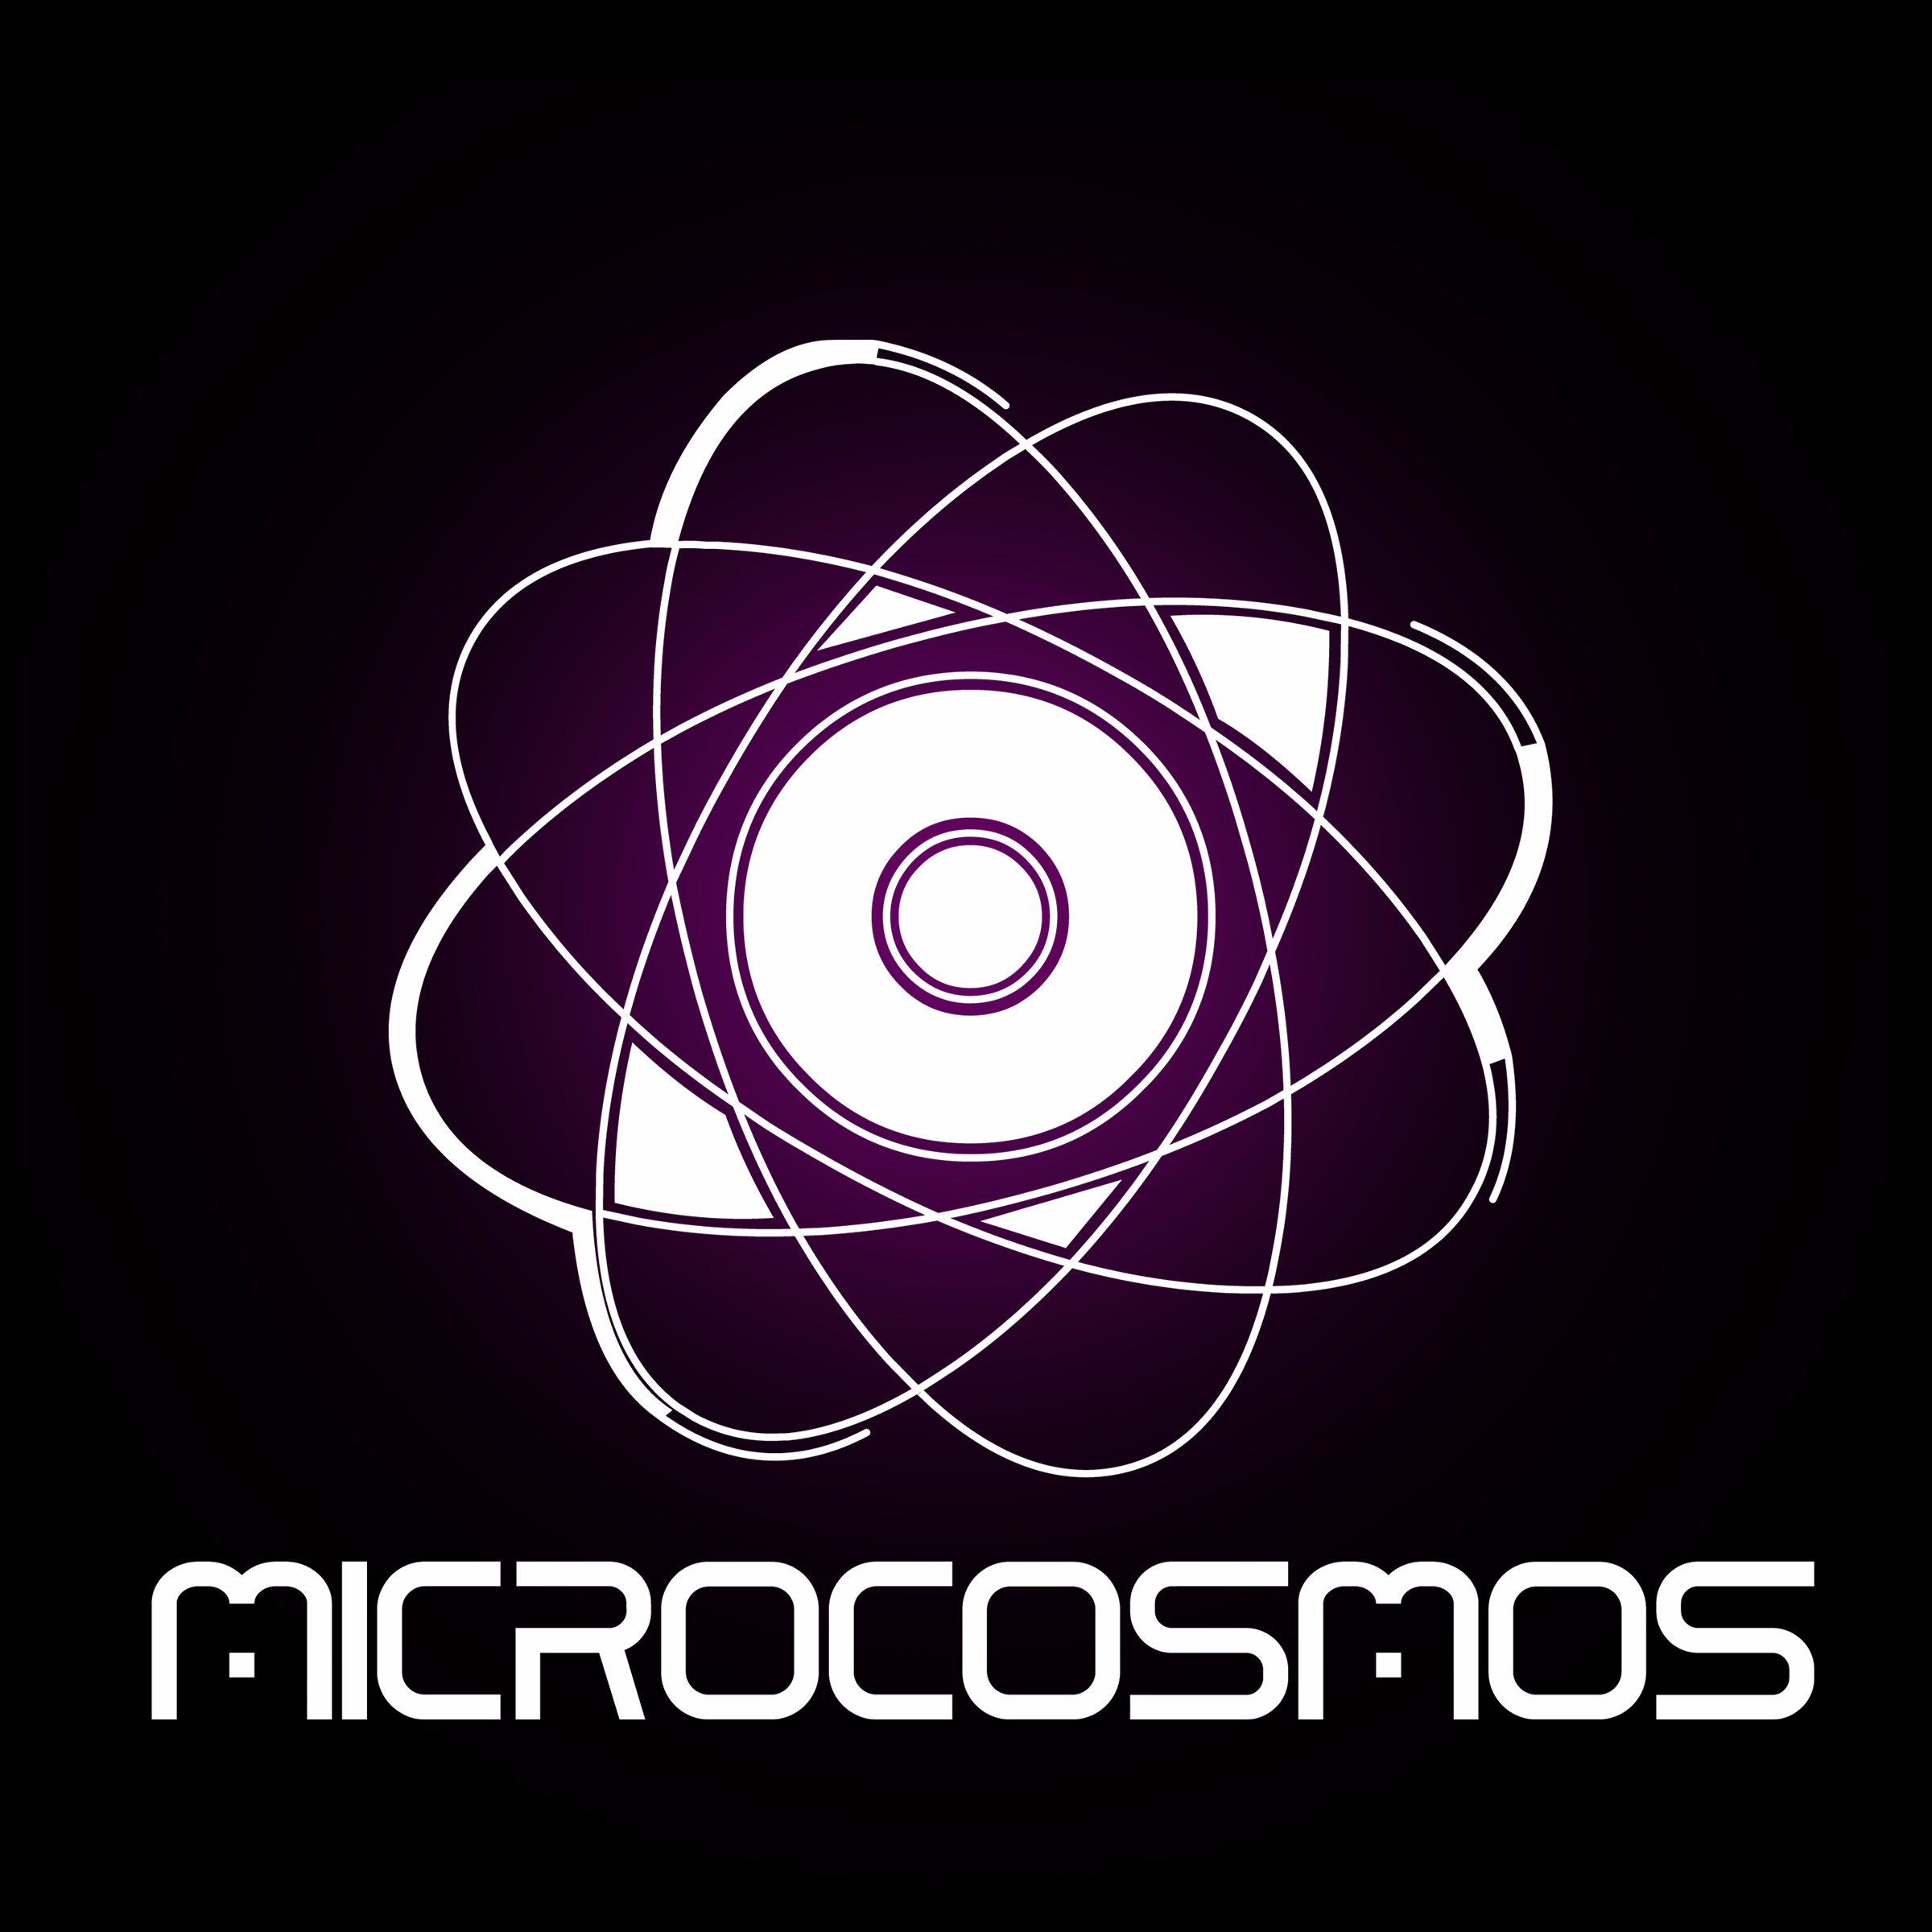 Microcosmos ChillOut and Ambient